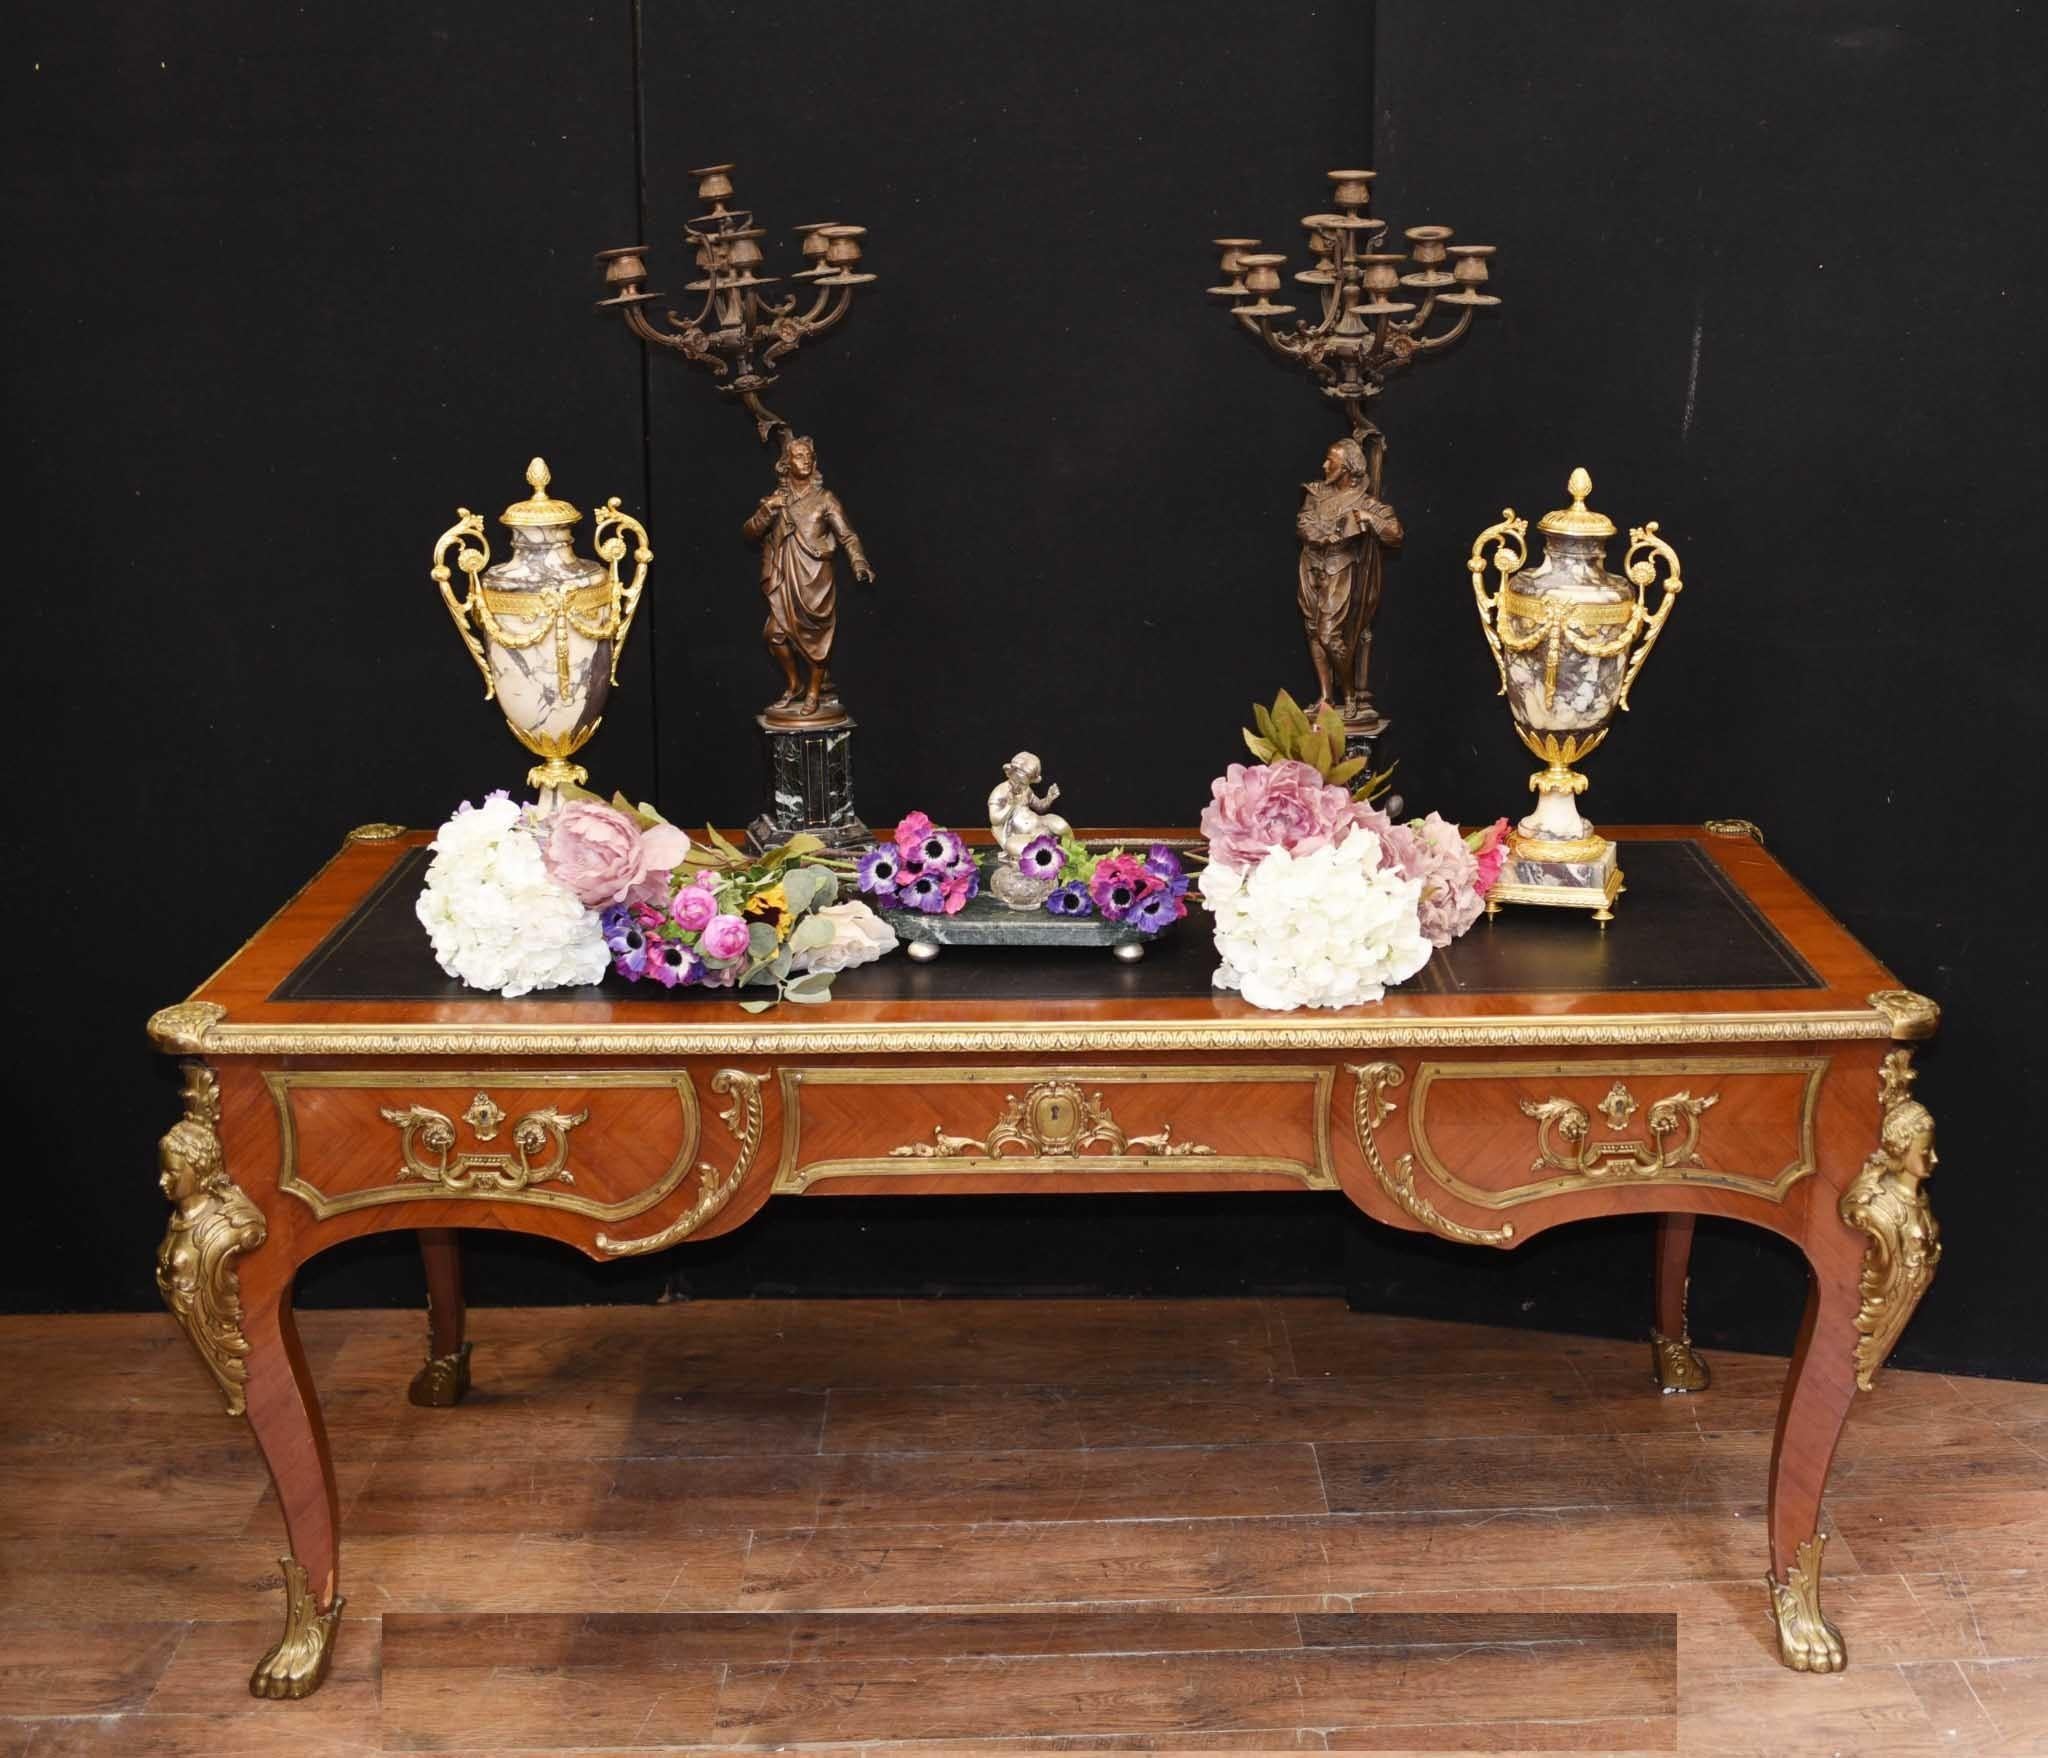 Large French Empire bureau plat or desk we date to circa 1930
Good size to it and a great look, perfect for home office set up
Ormolu fixtures original including maiden busts on table legs
Purchased from a dealer on Marche Biron at Paris antiques